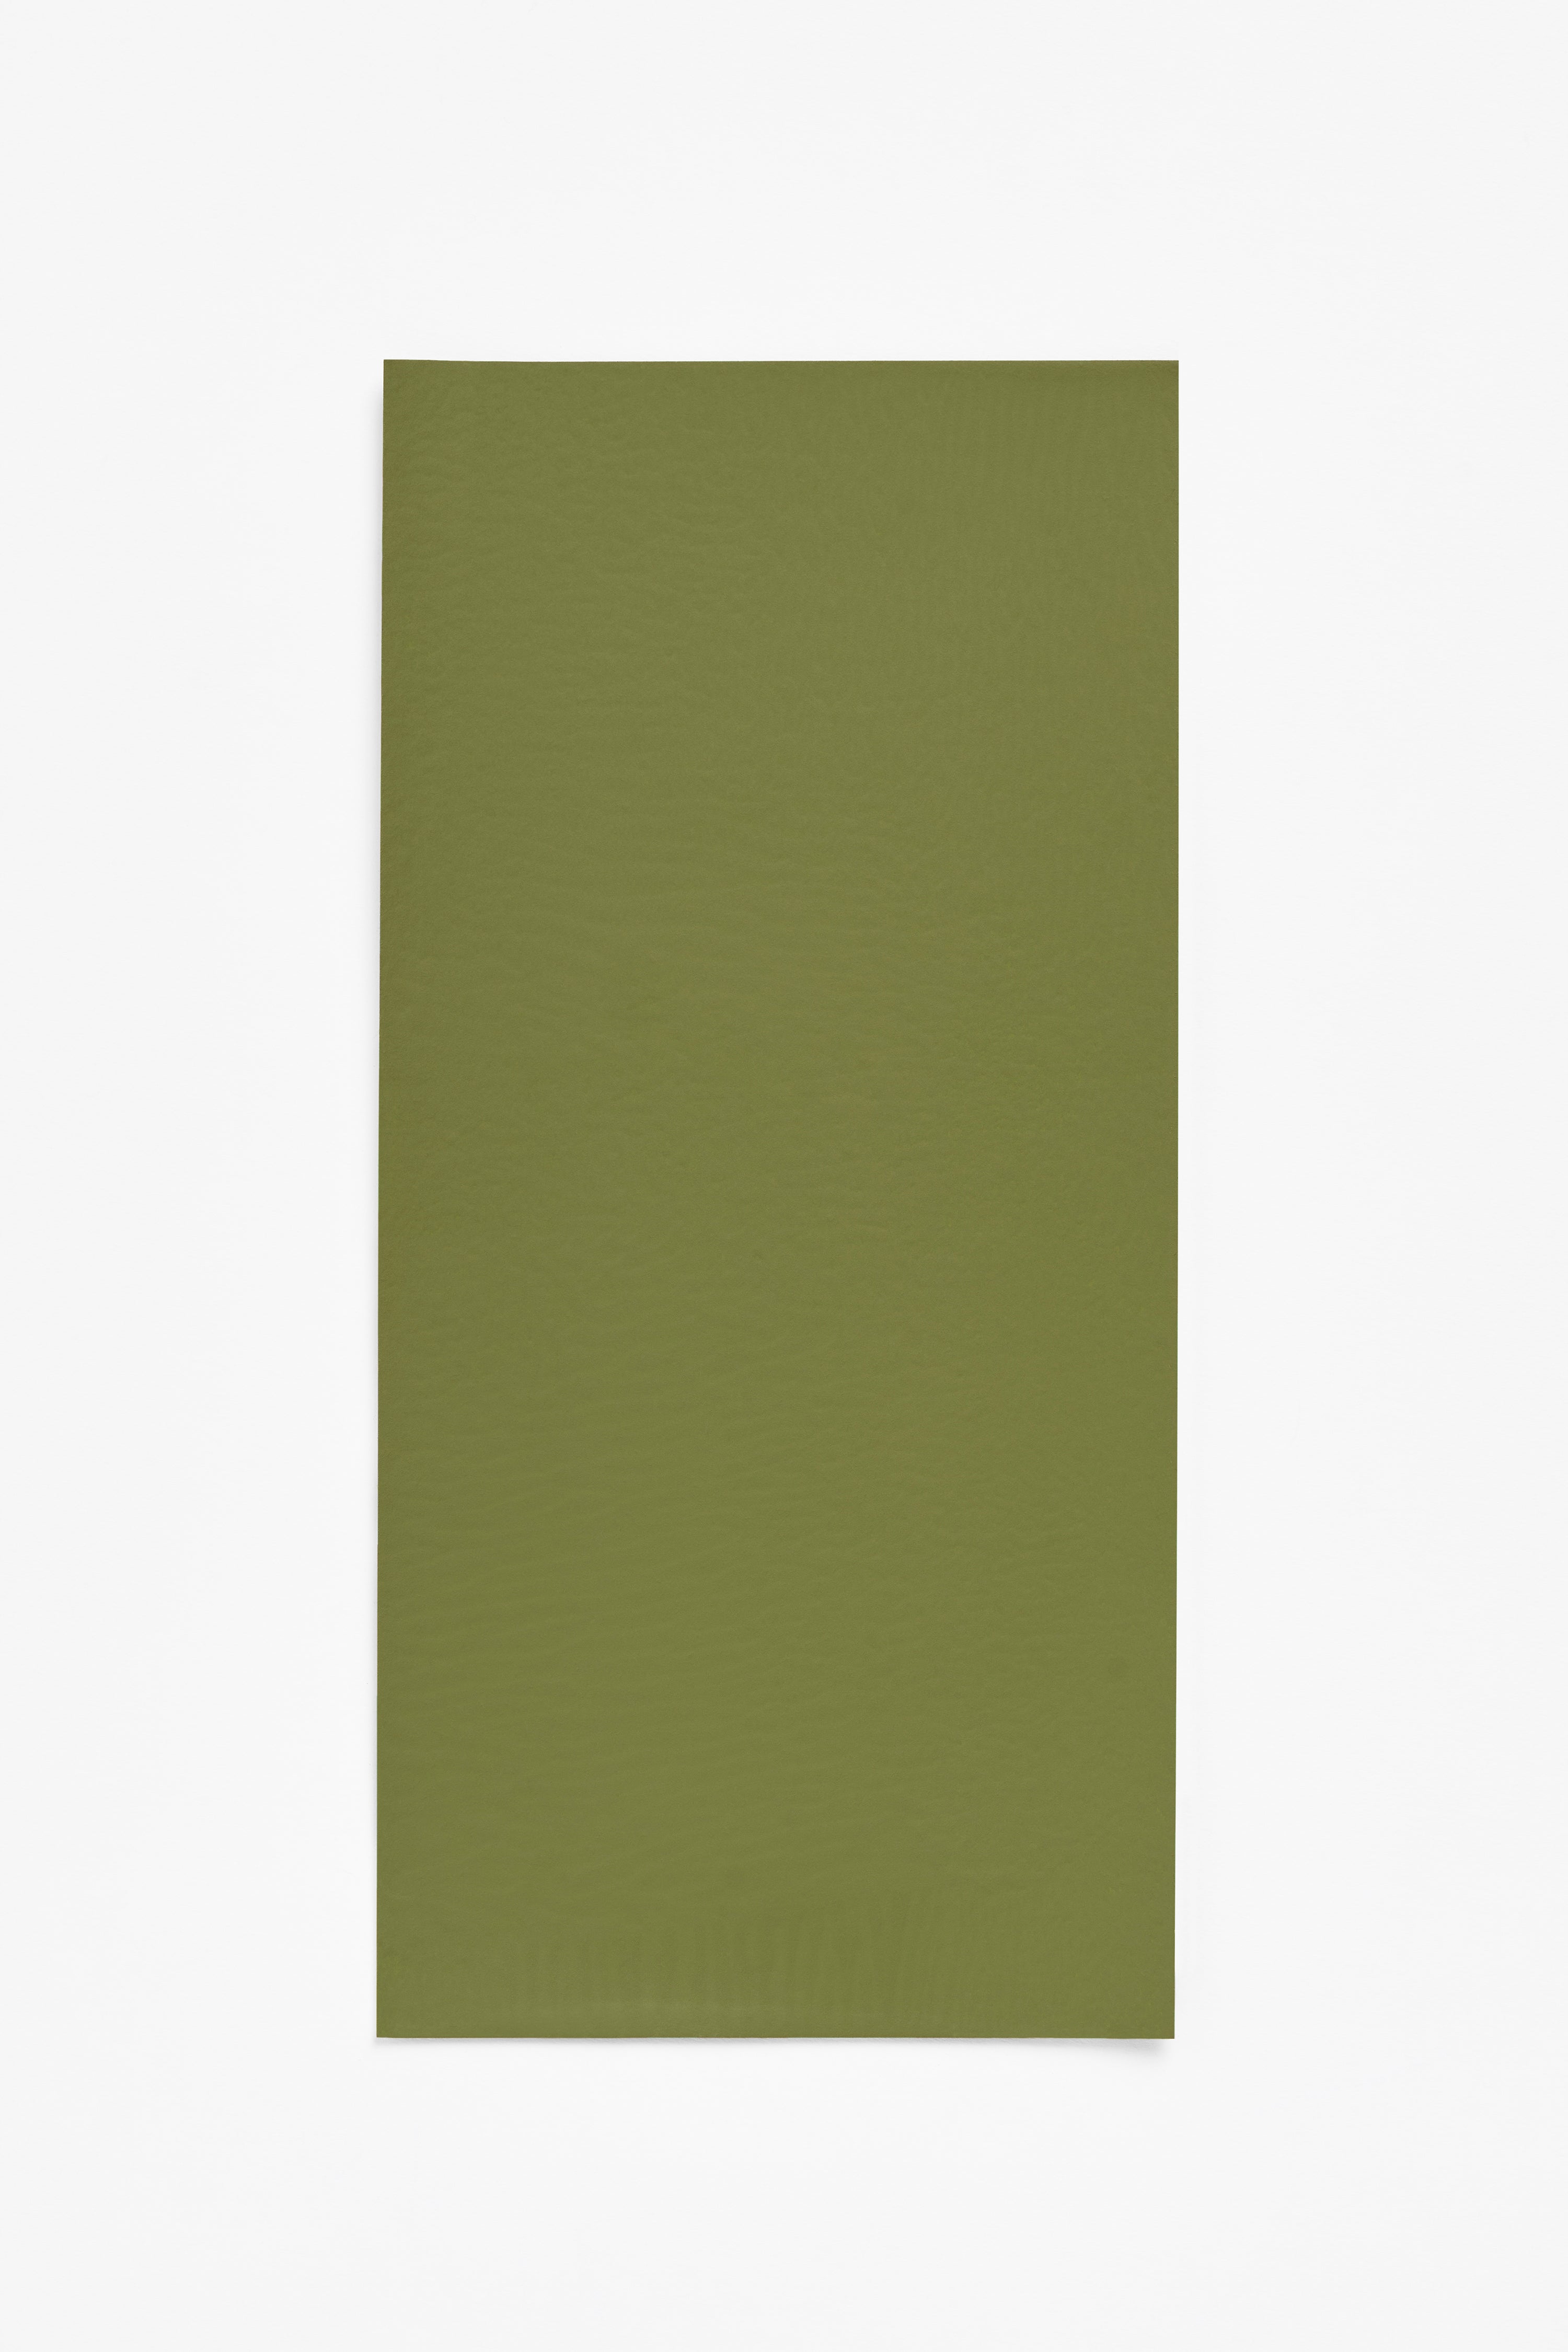 Moss — a paint colour developed by Barber Osgerby for Blēo